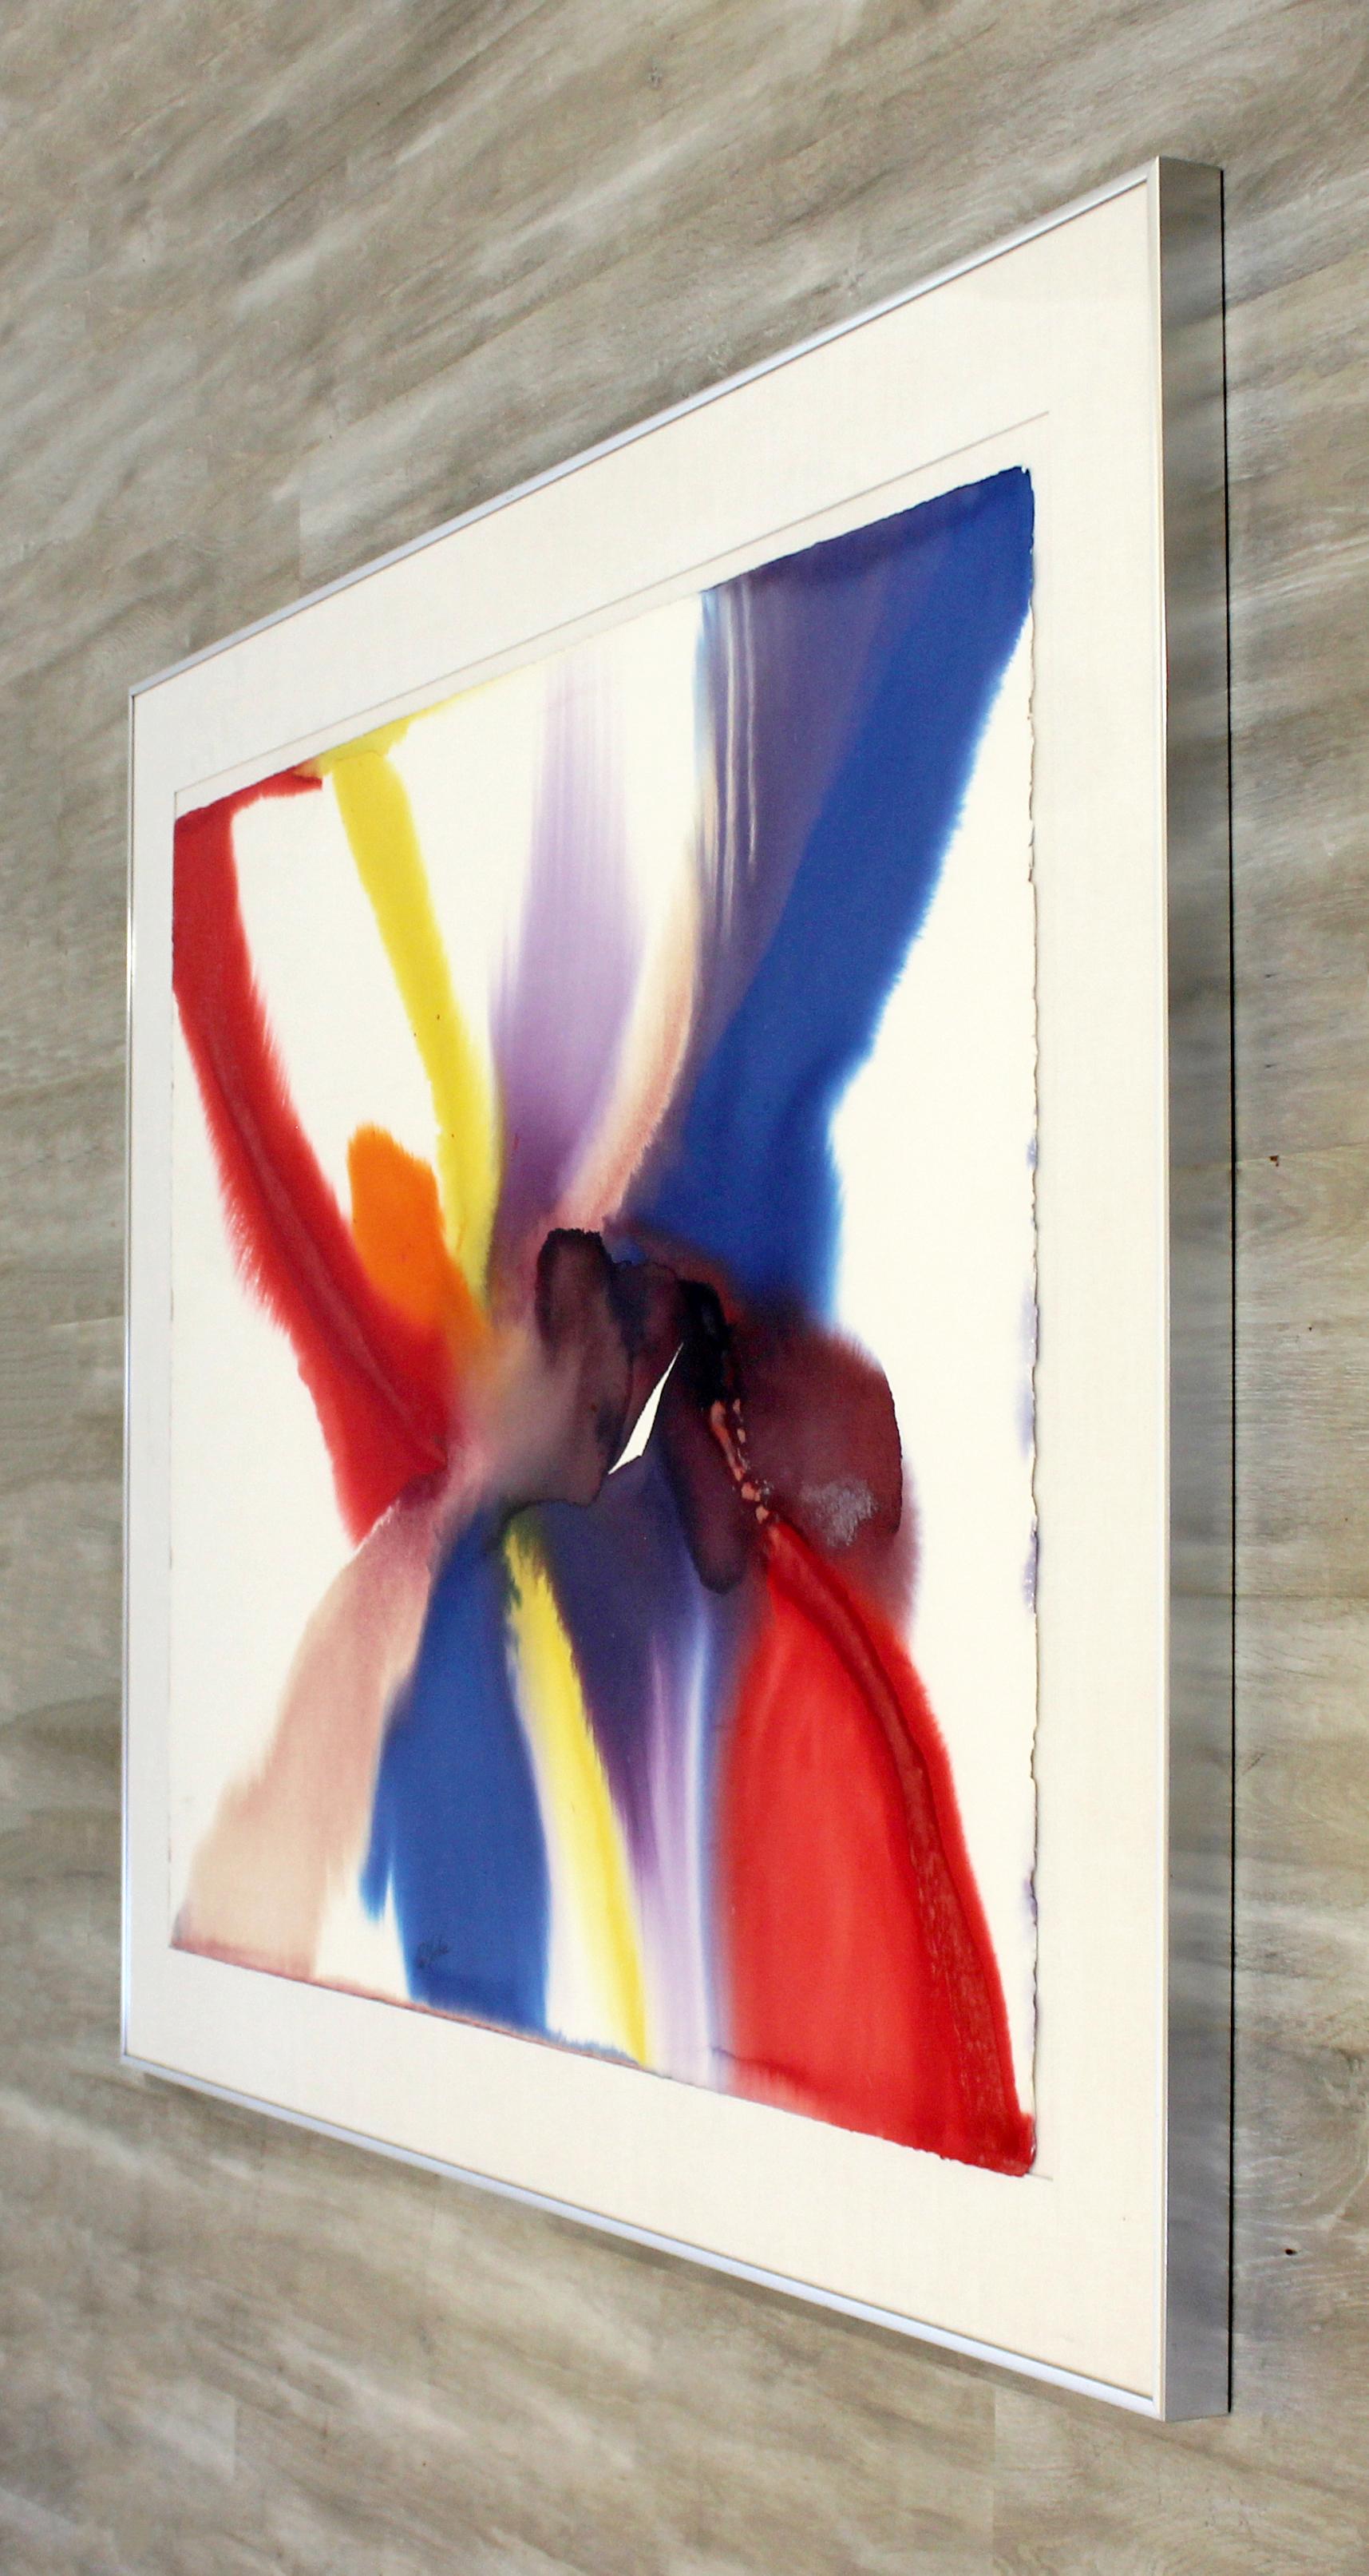 Late 20th Century Mid-Century Modern Framed Abstract Watercolor Painting Signed Paul Jenkins, 1980